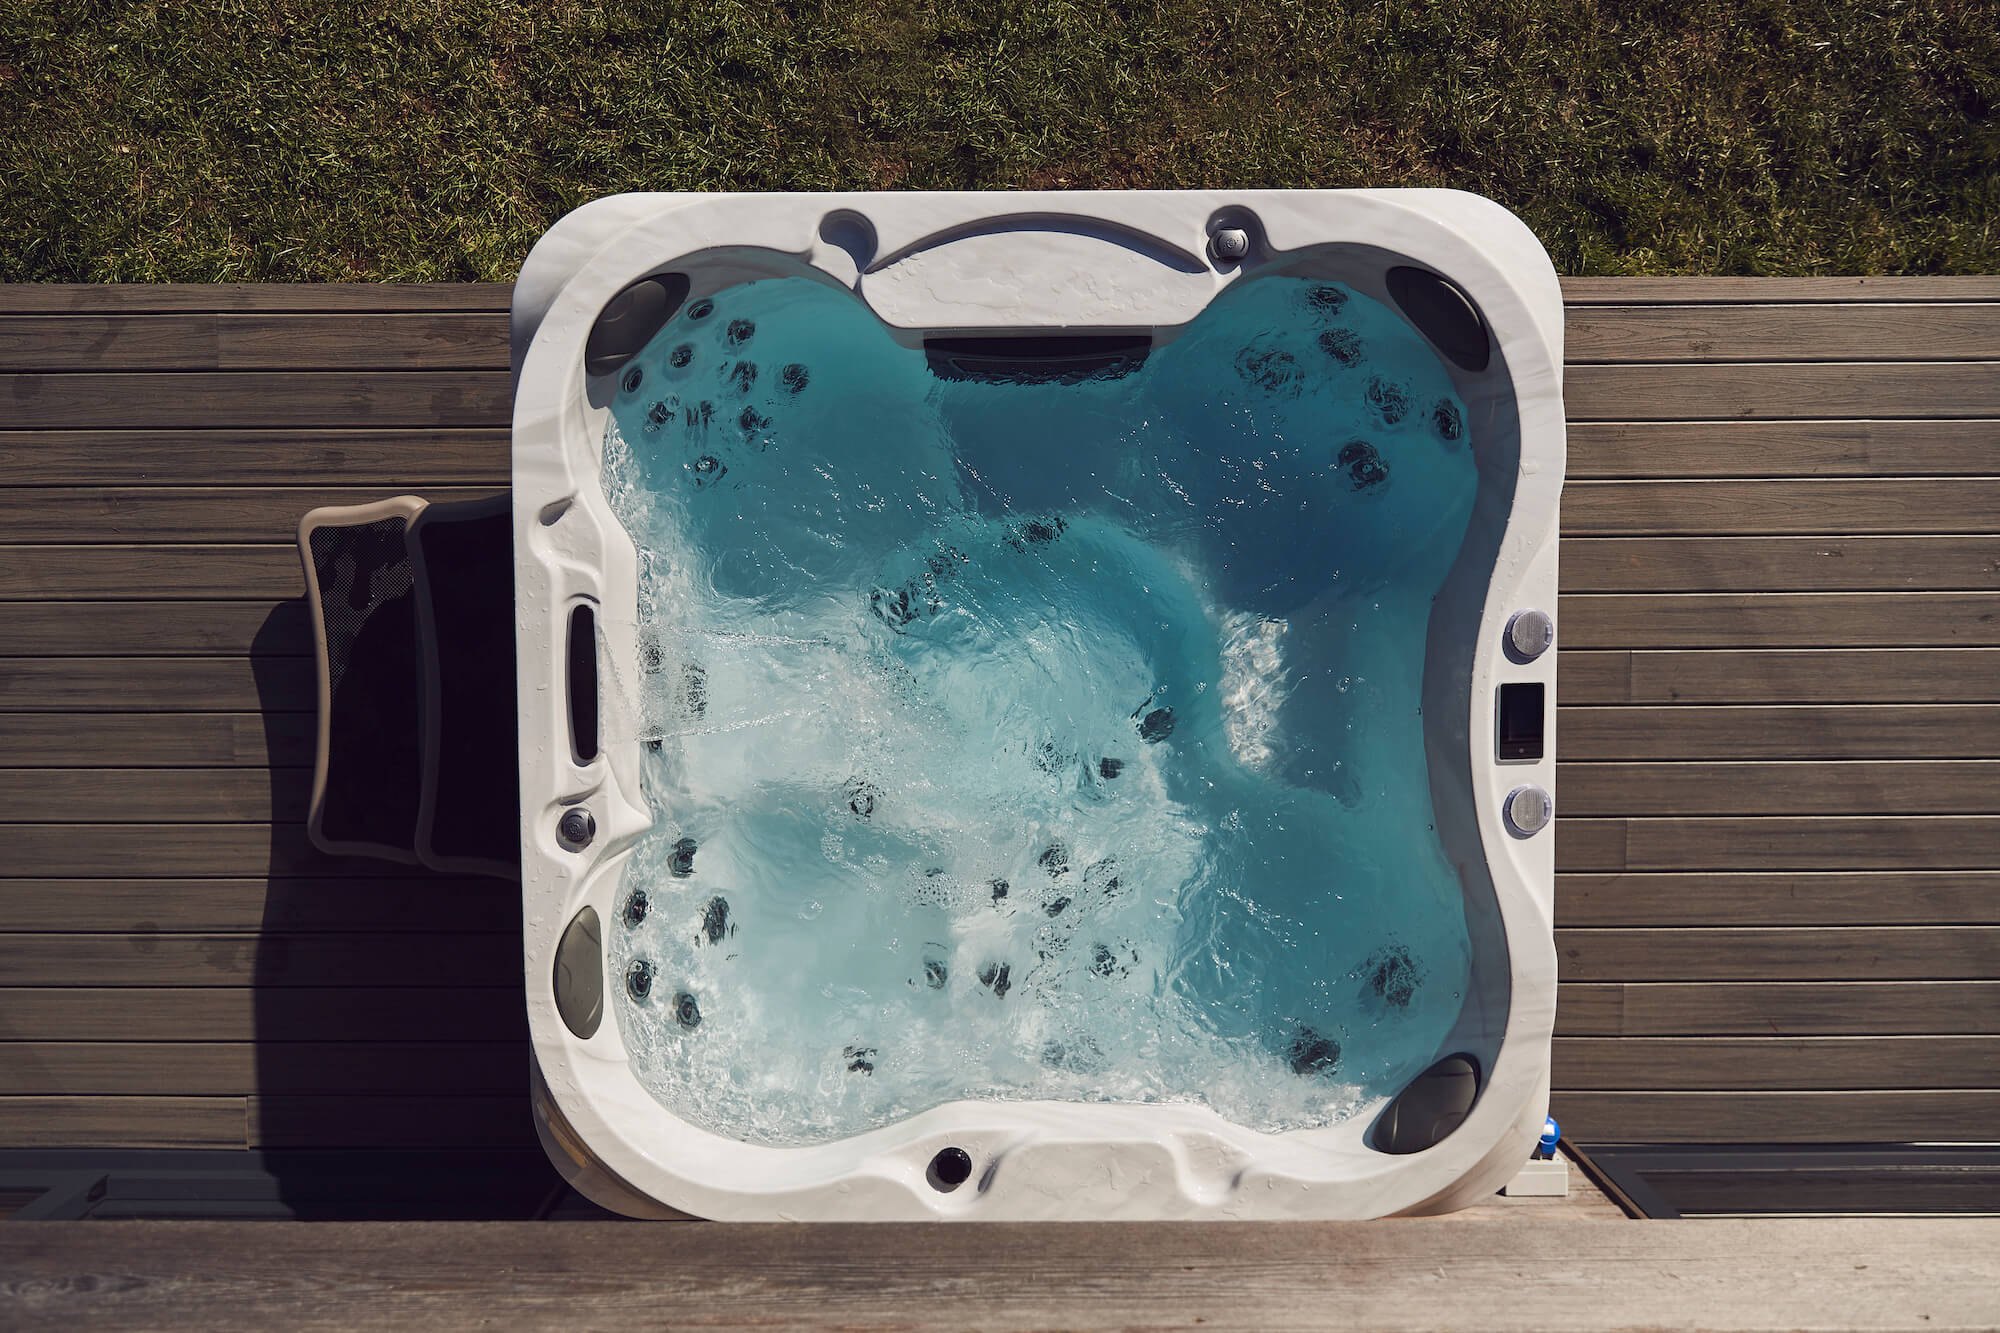 Things you probably didn’t know about hot tubs…